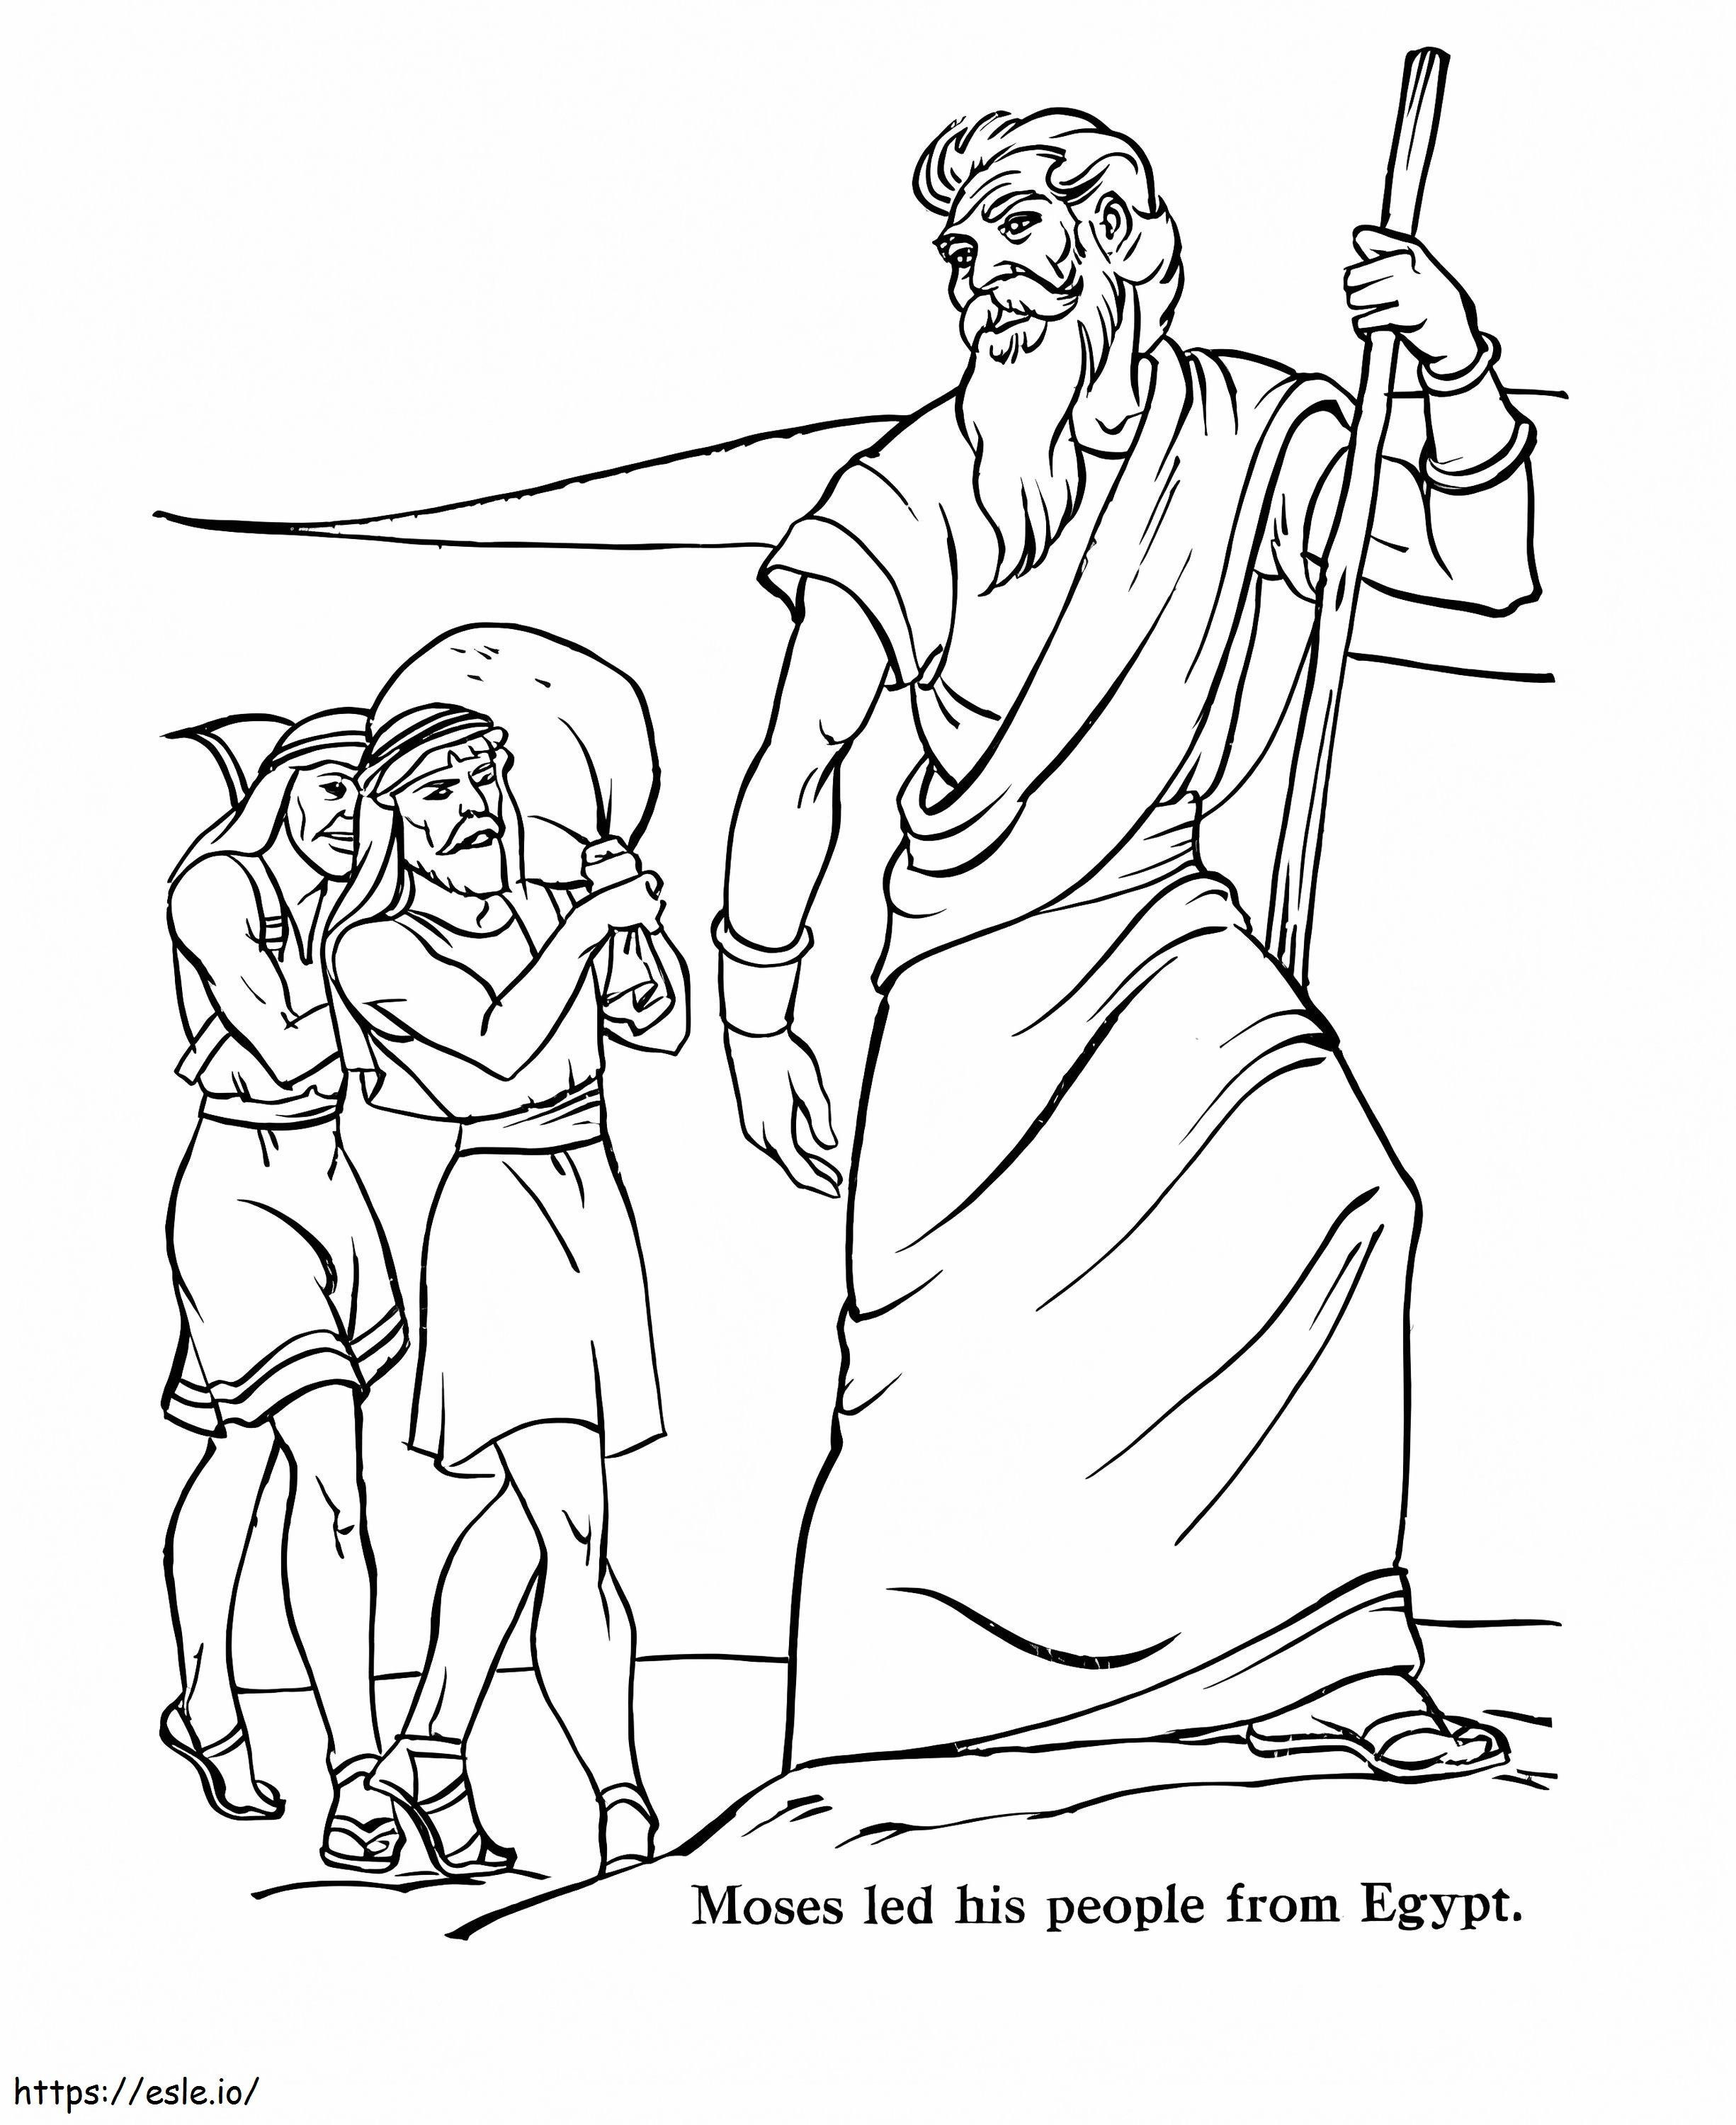 Moses And His People coloring page